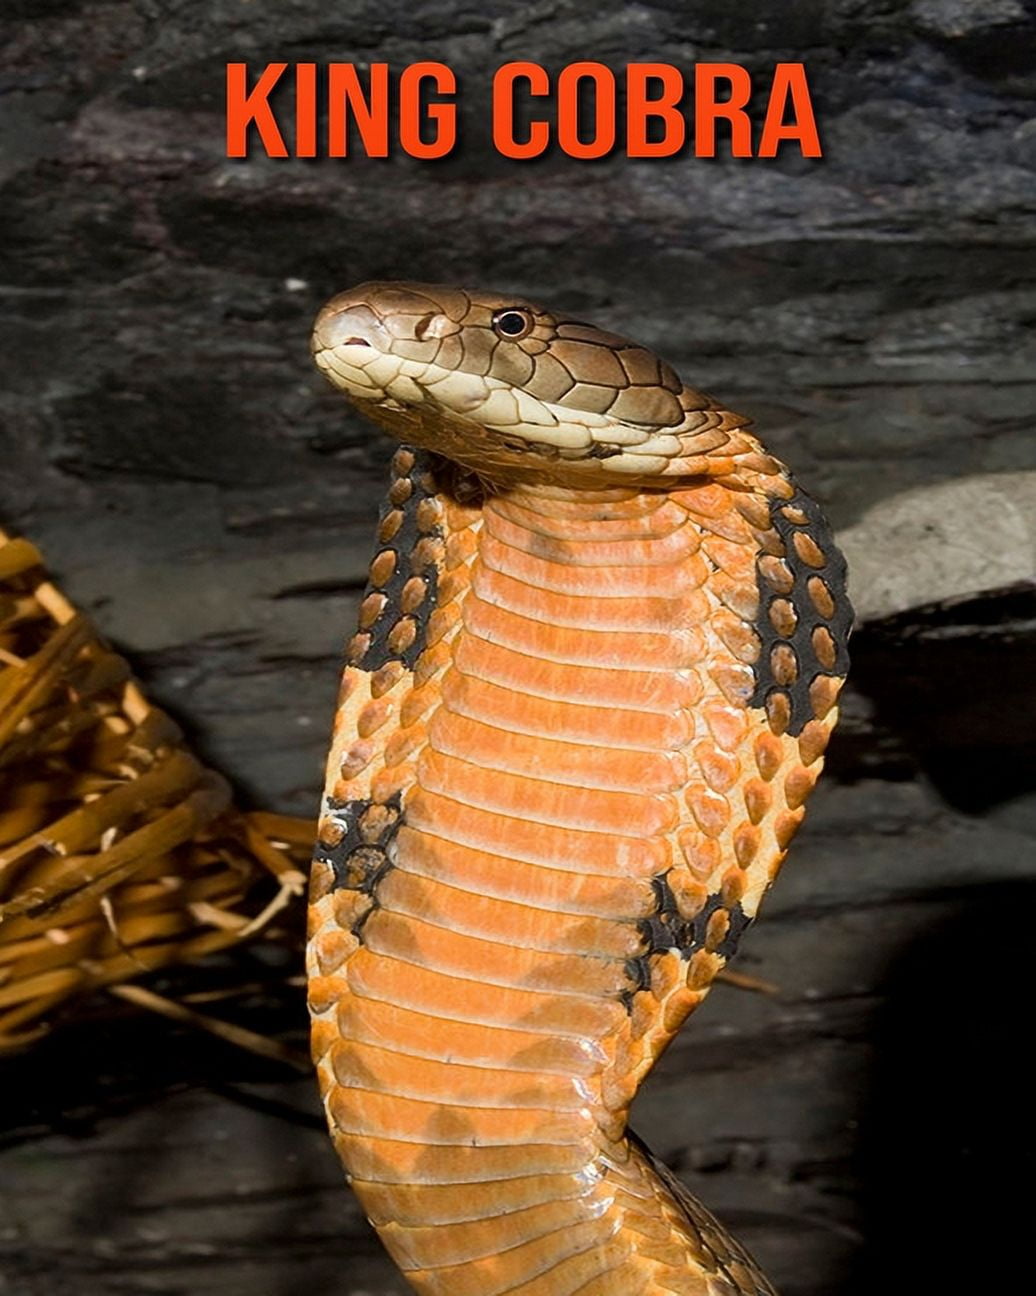 King cobra, facts and photos